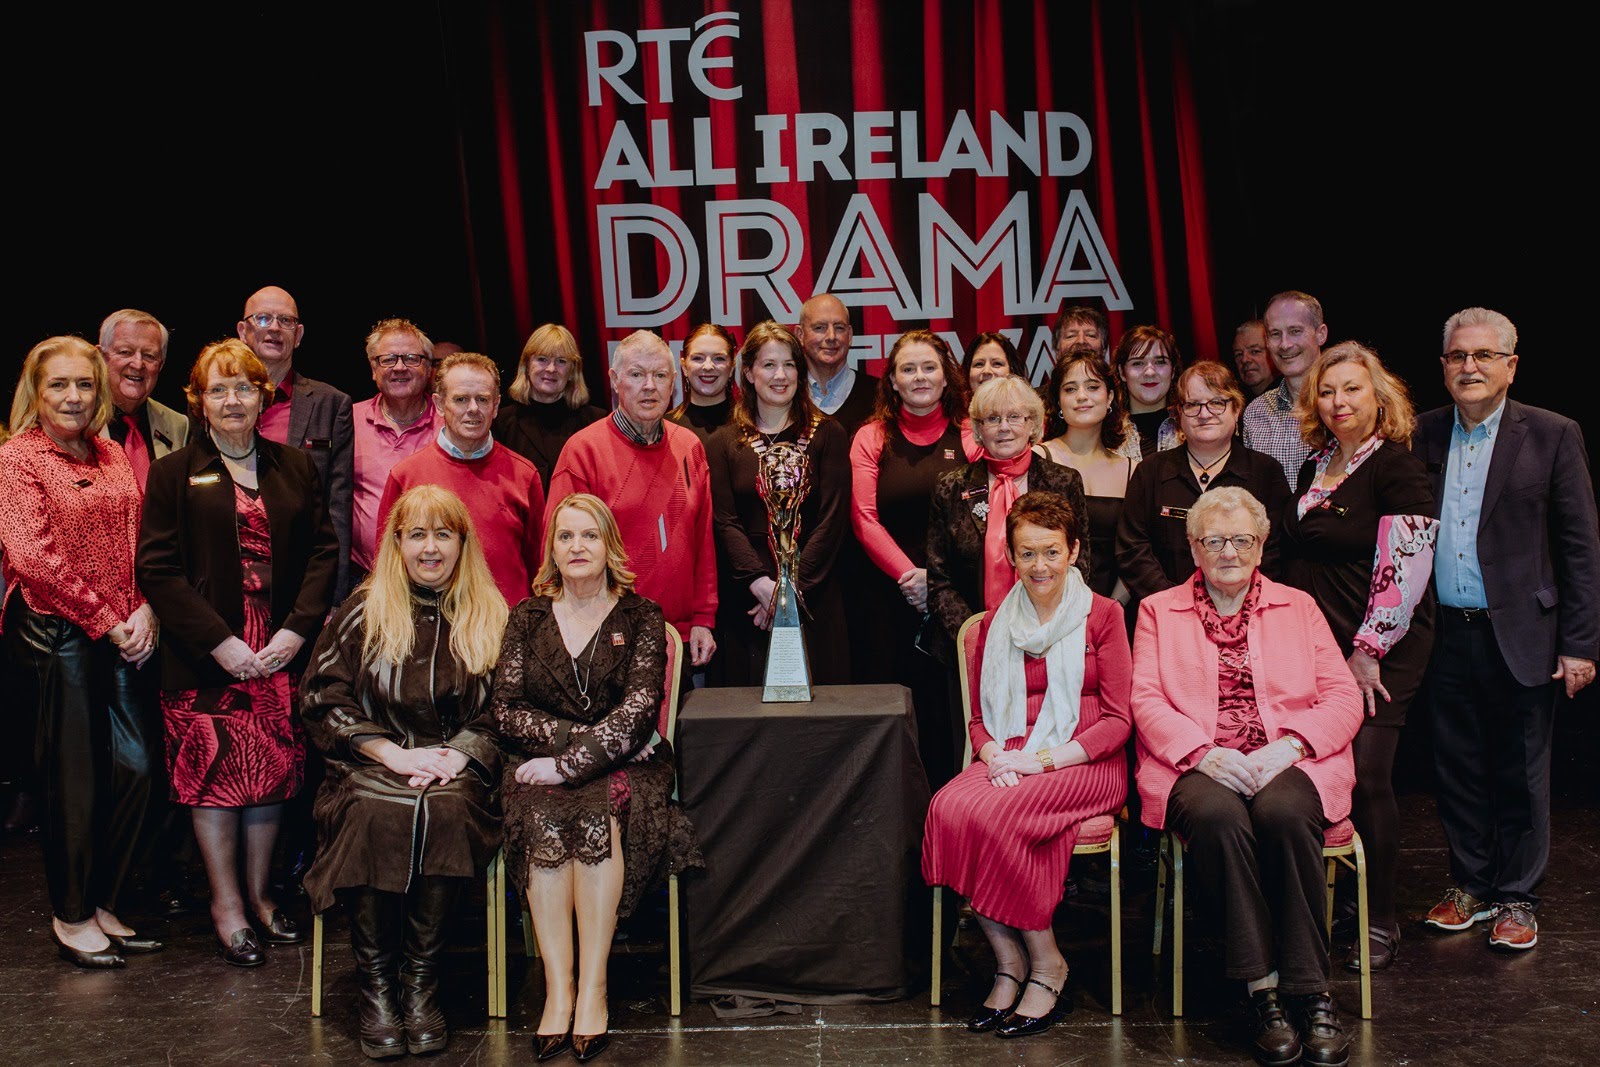 RTÉ All Ireland Drama Festival committee group picture